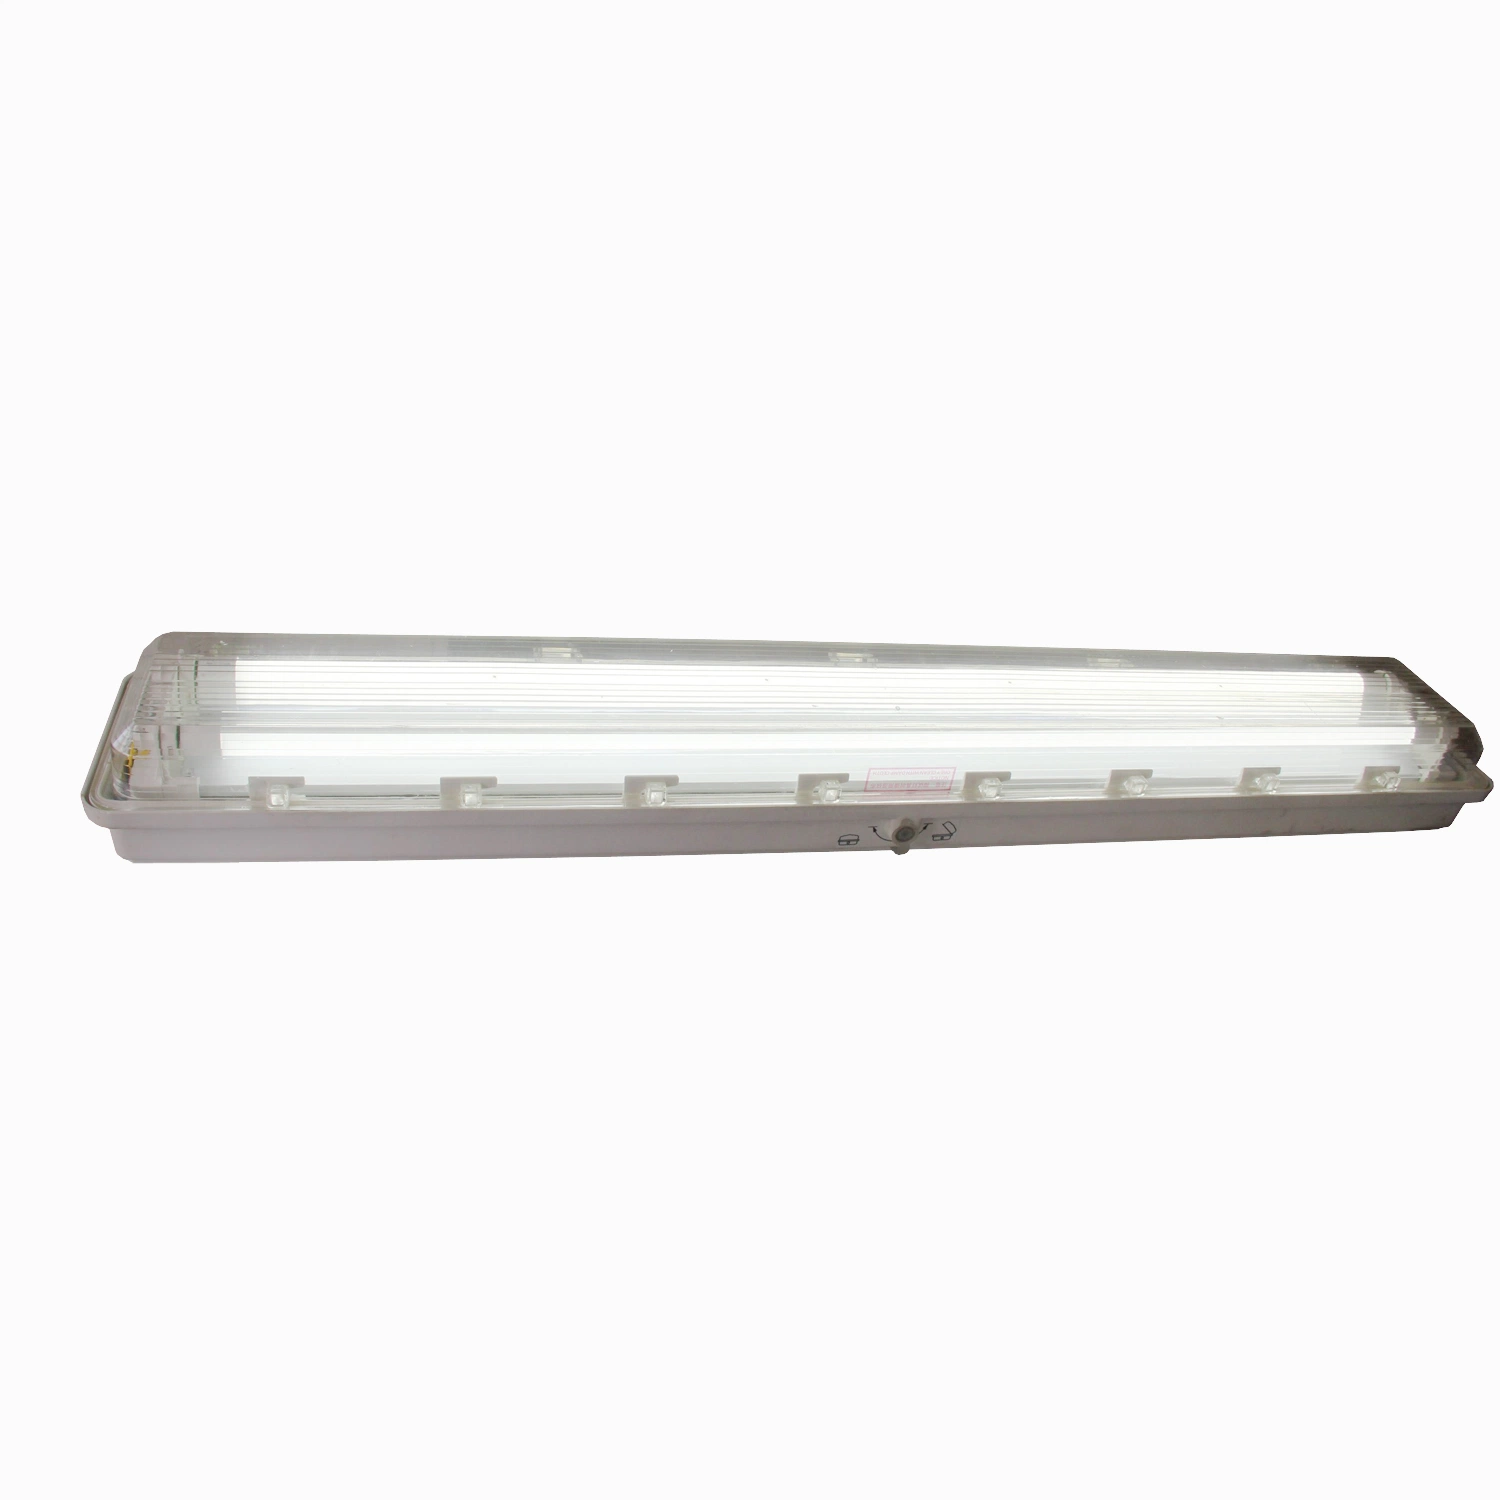 Hot Selling LED Explosion Proof Lighting Fixture Ceiling Light Fixtures